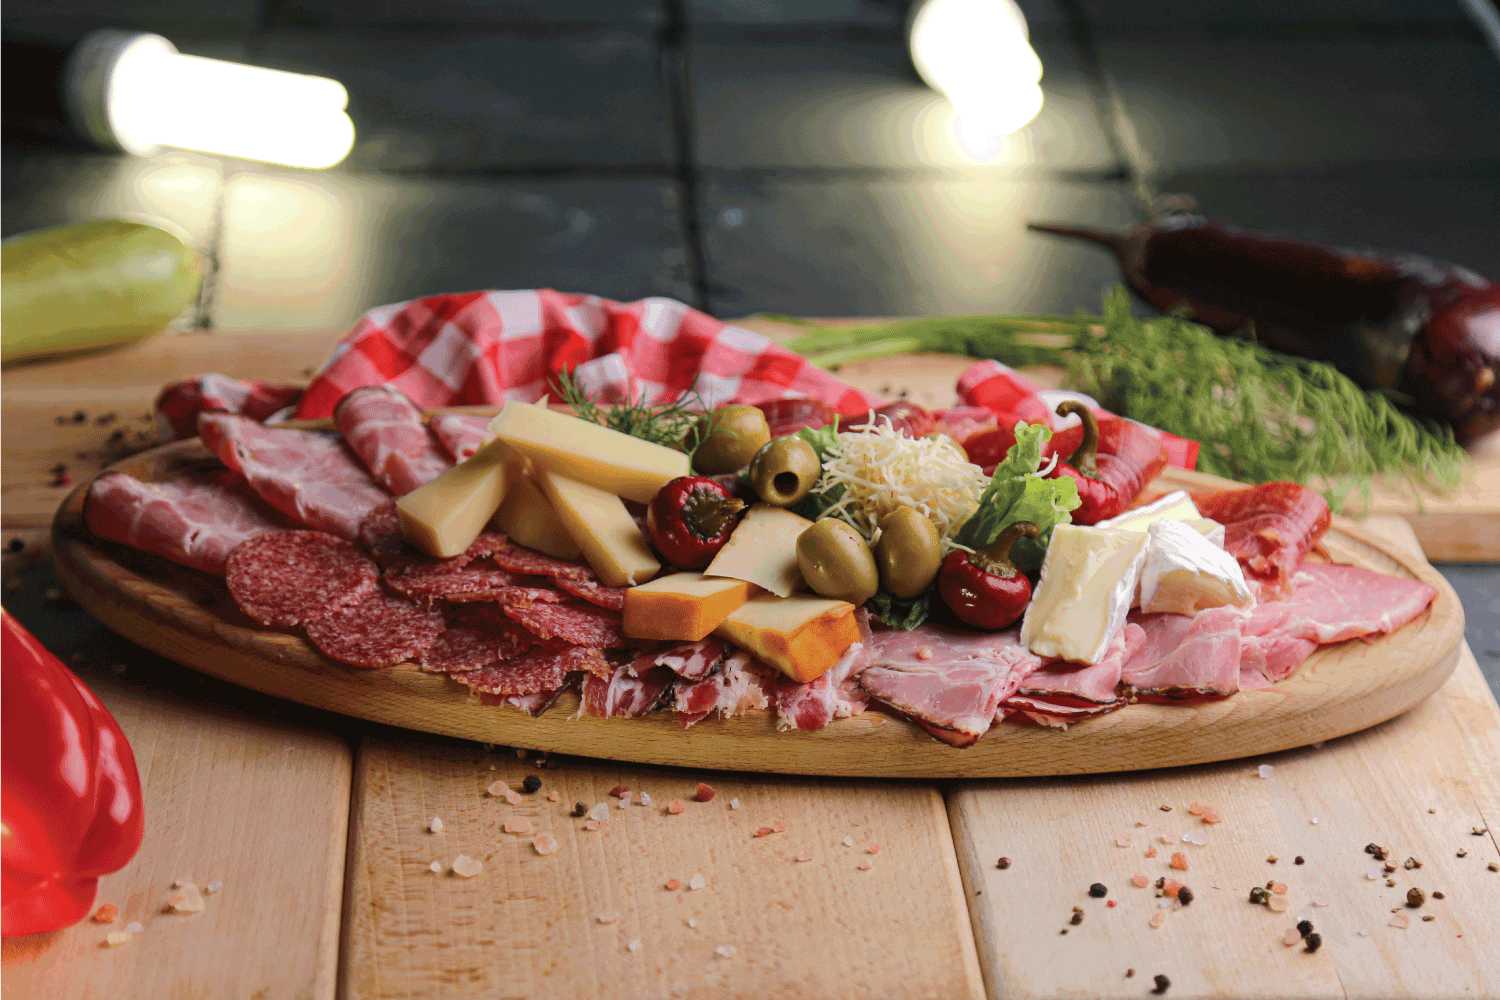 Antipasto appetizer platter with ham, salami, olive, brie cheese, goat cheese. charcuterie board